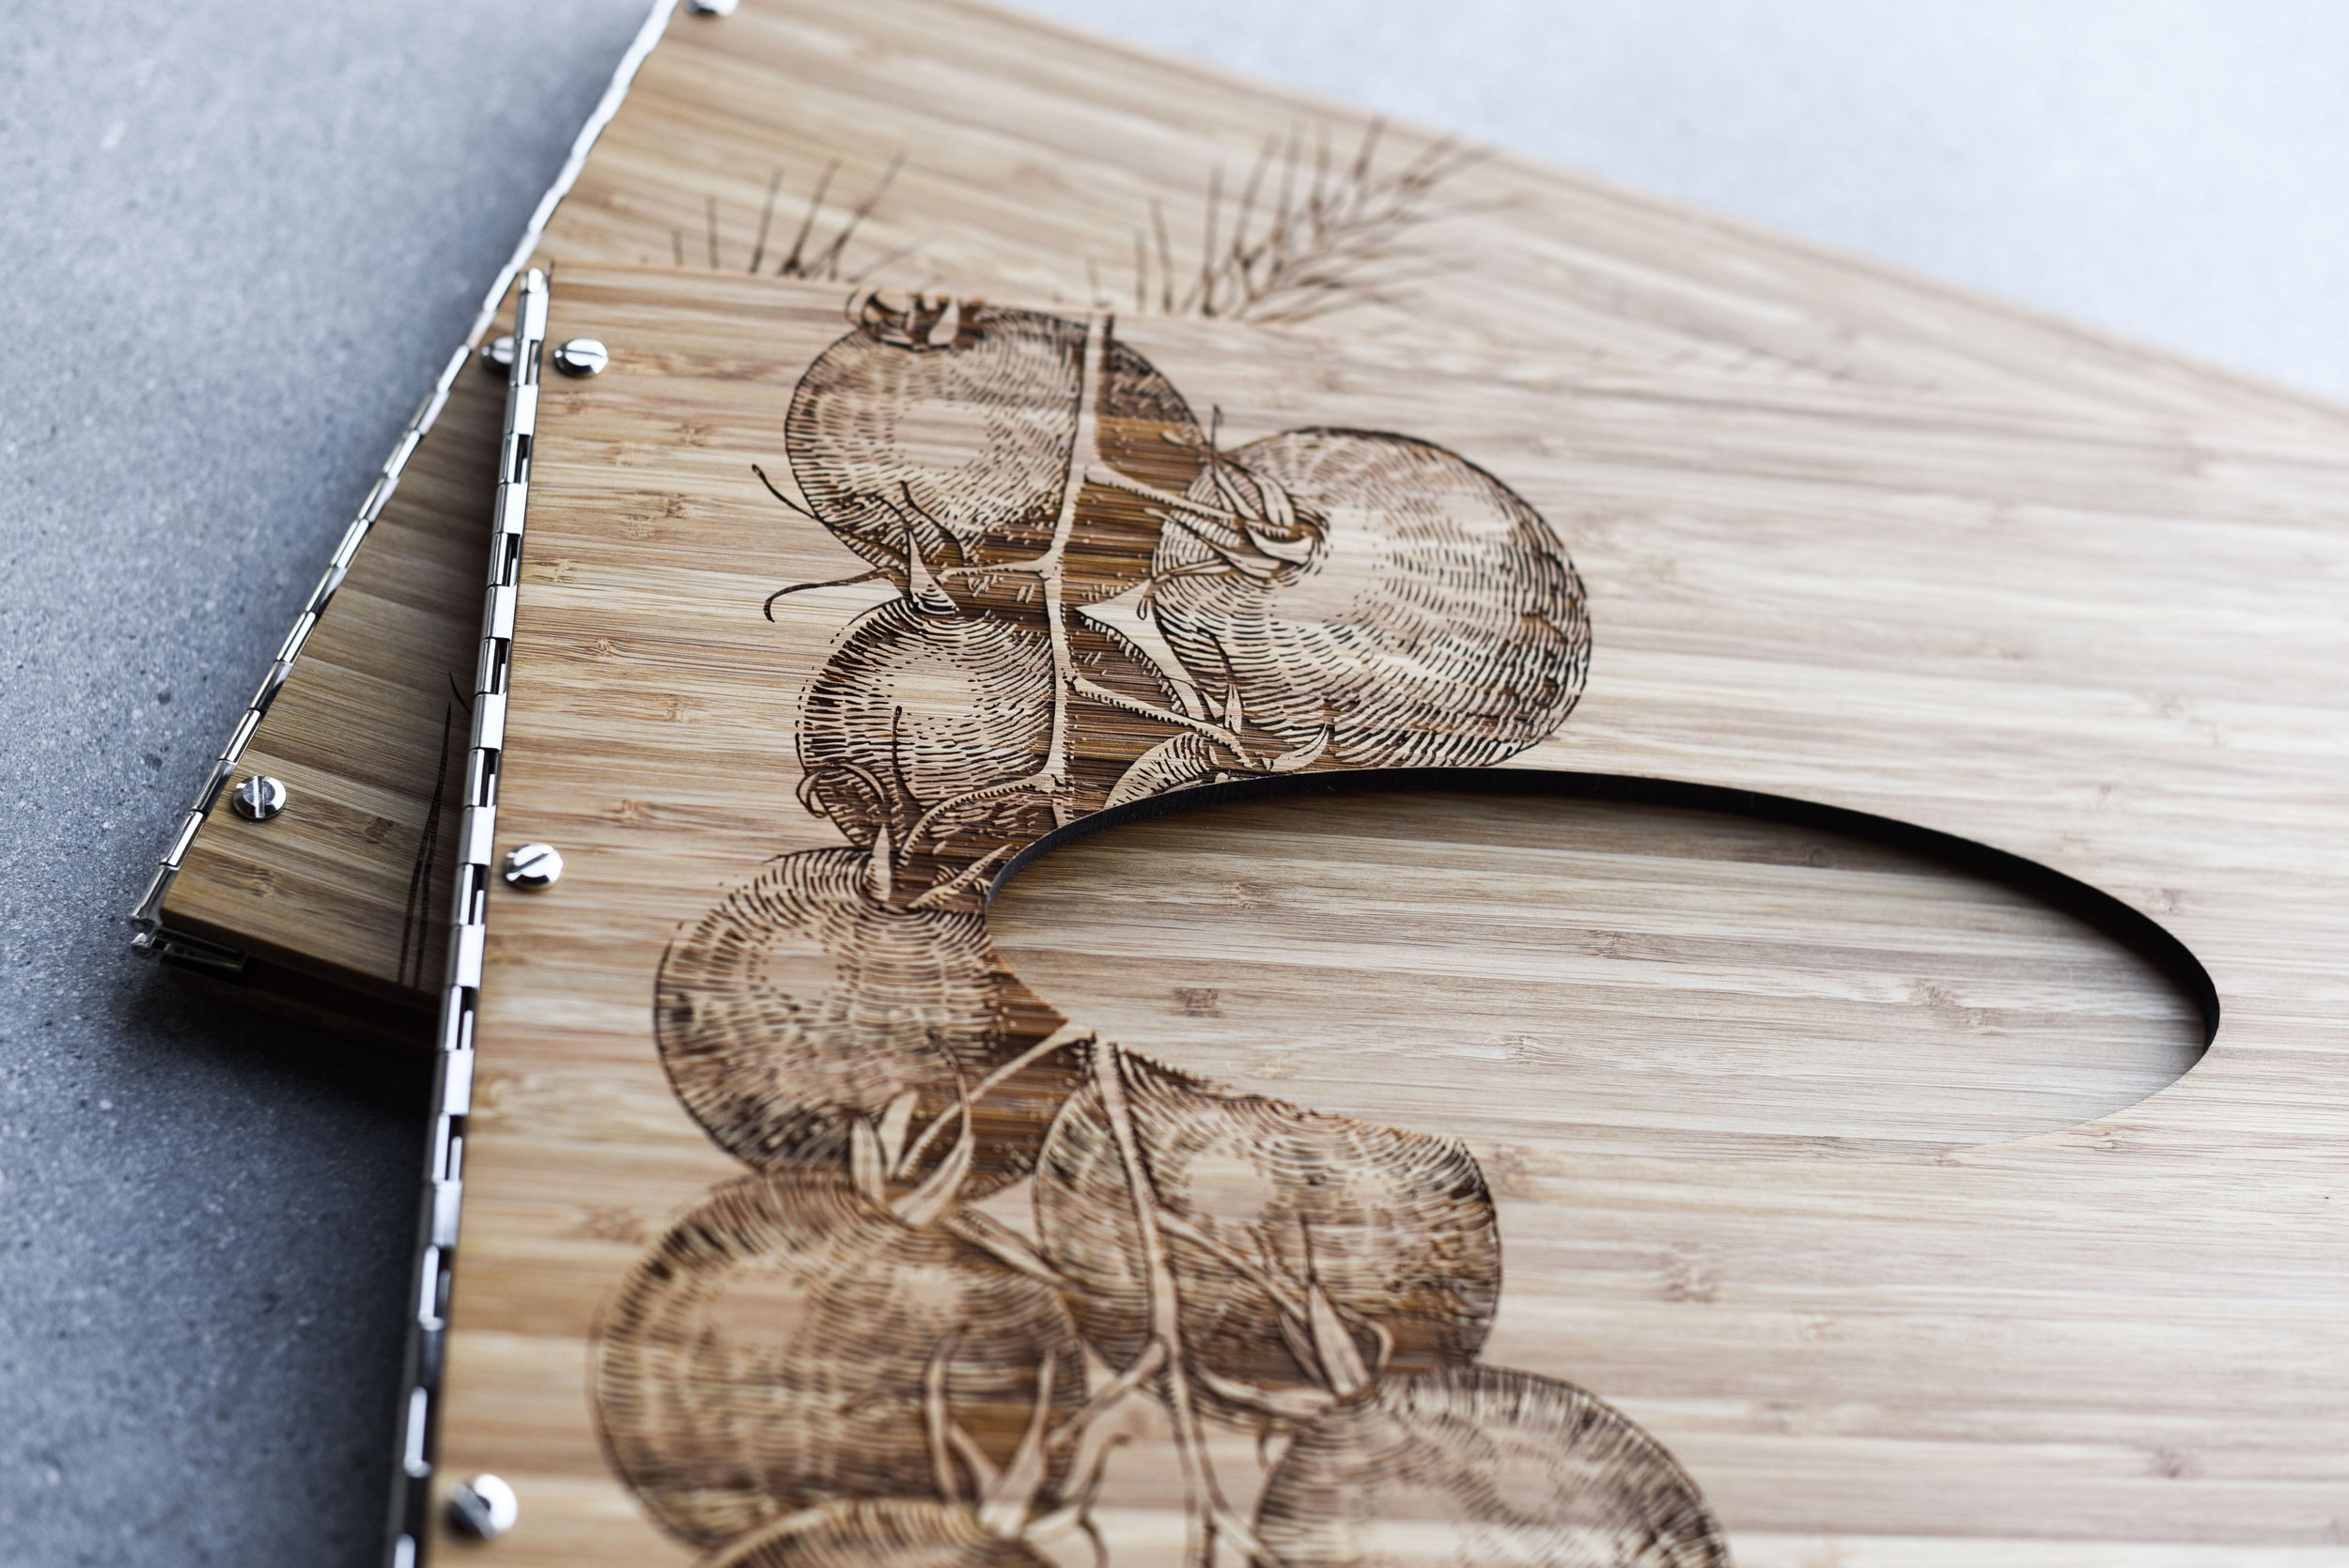 custom wood engraving and cutting in vancouver